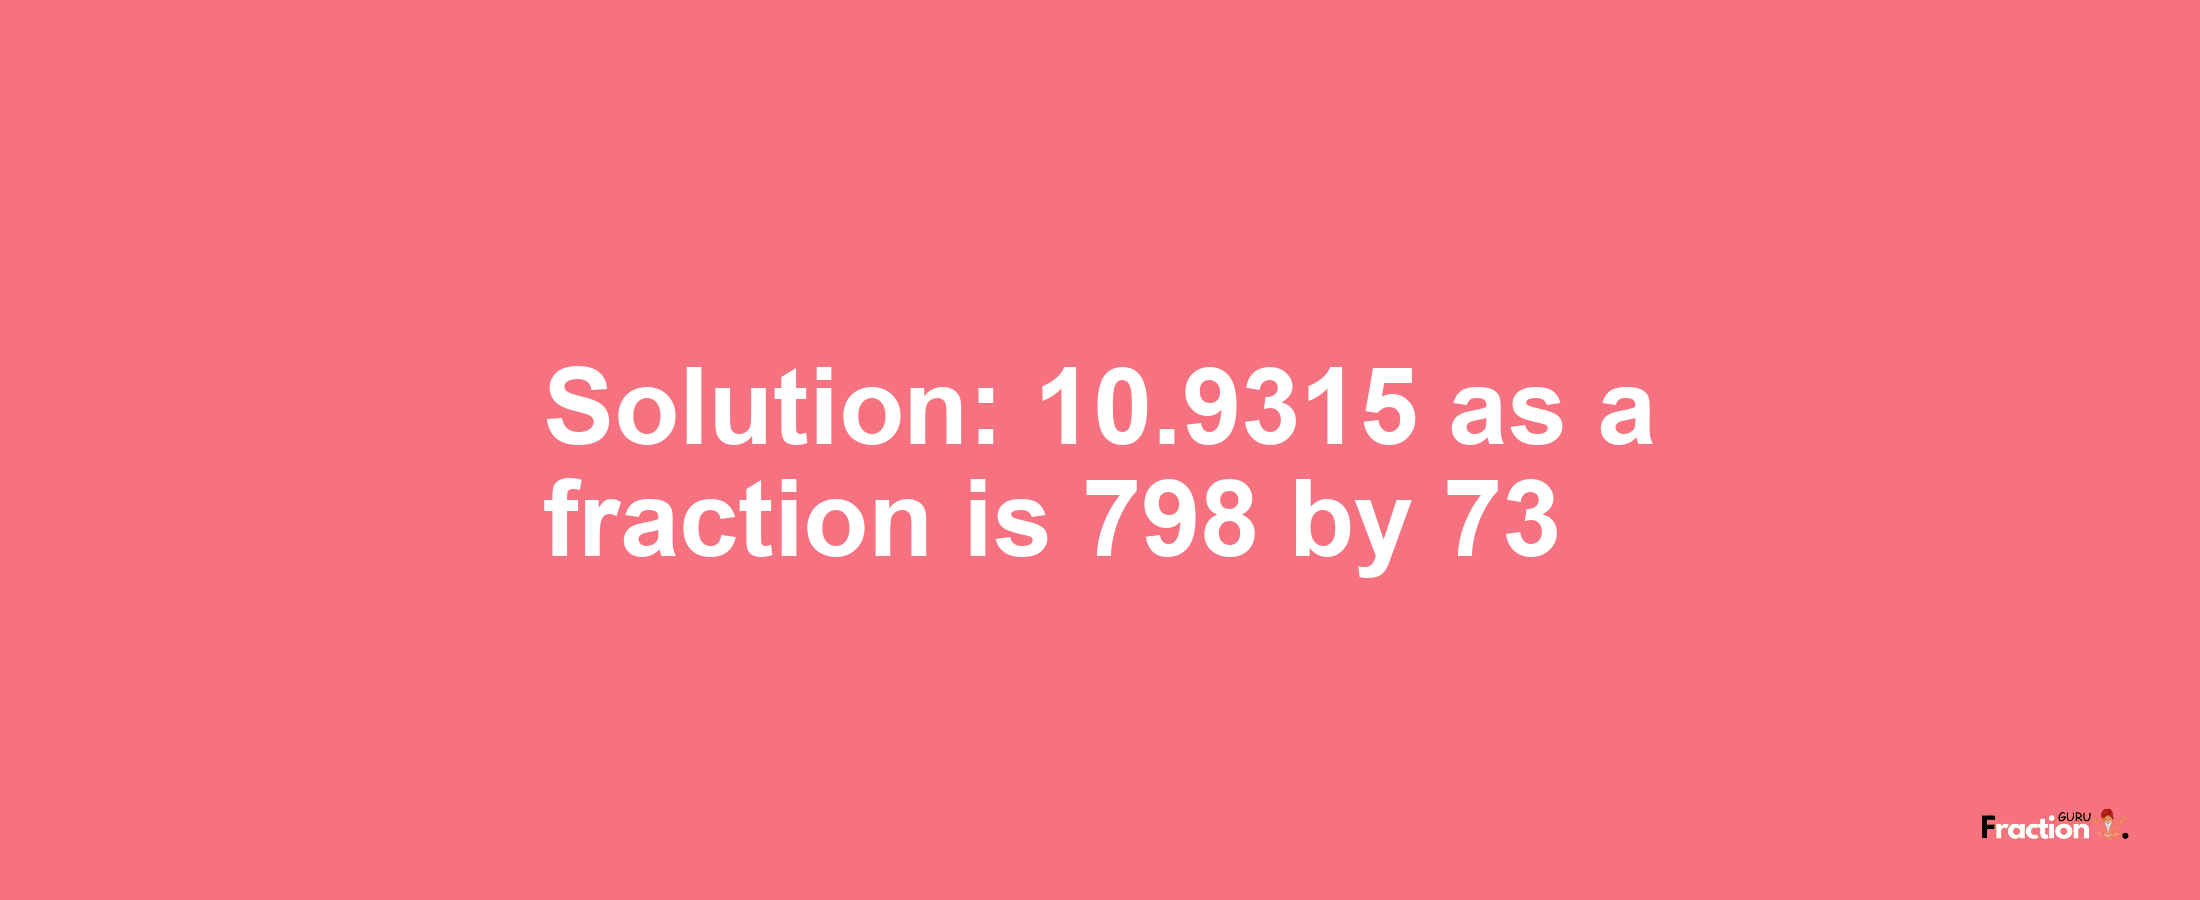 Solution:10.9315 as a fraction is 798/73